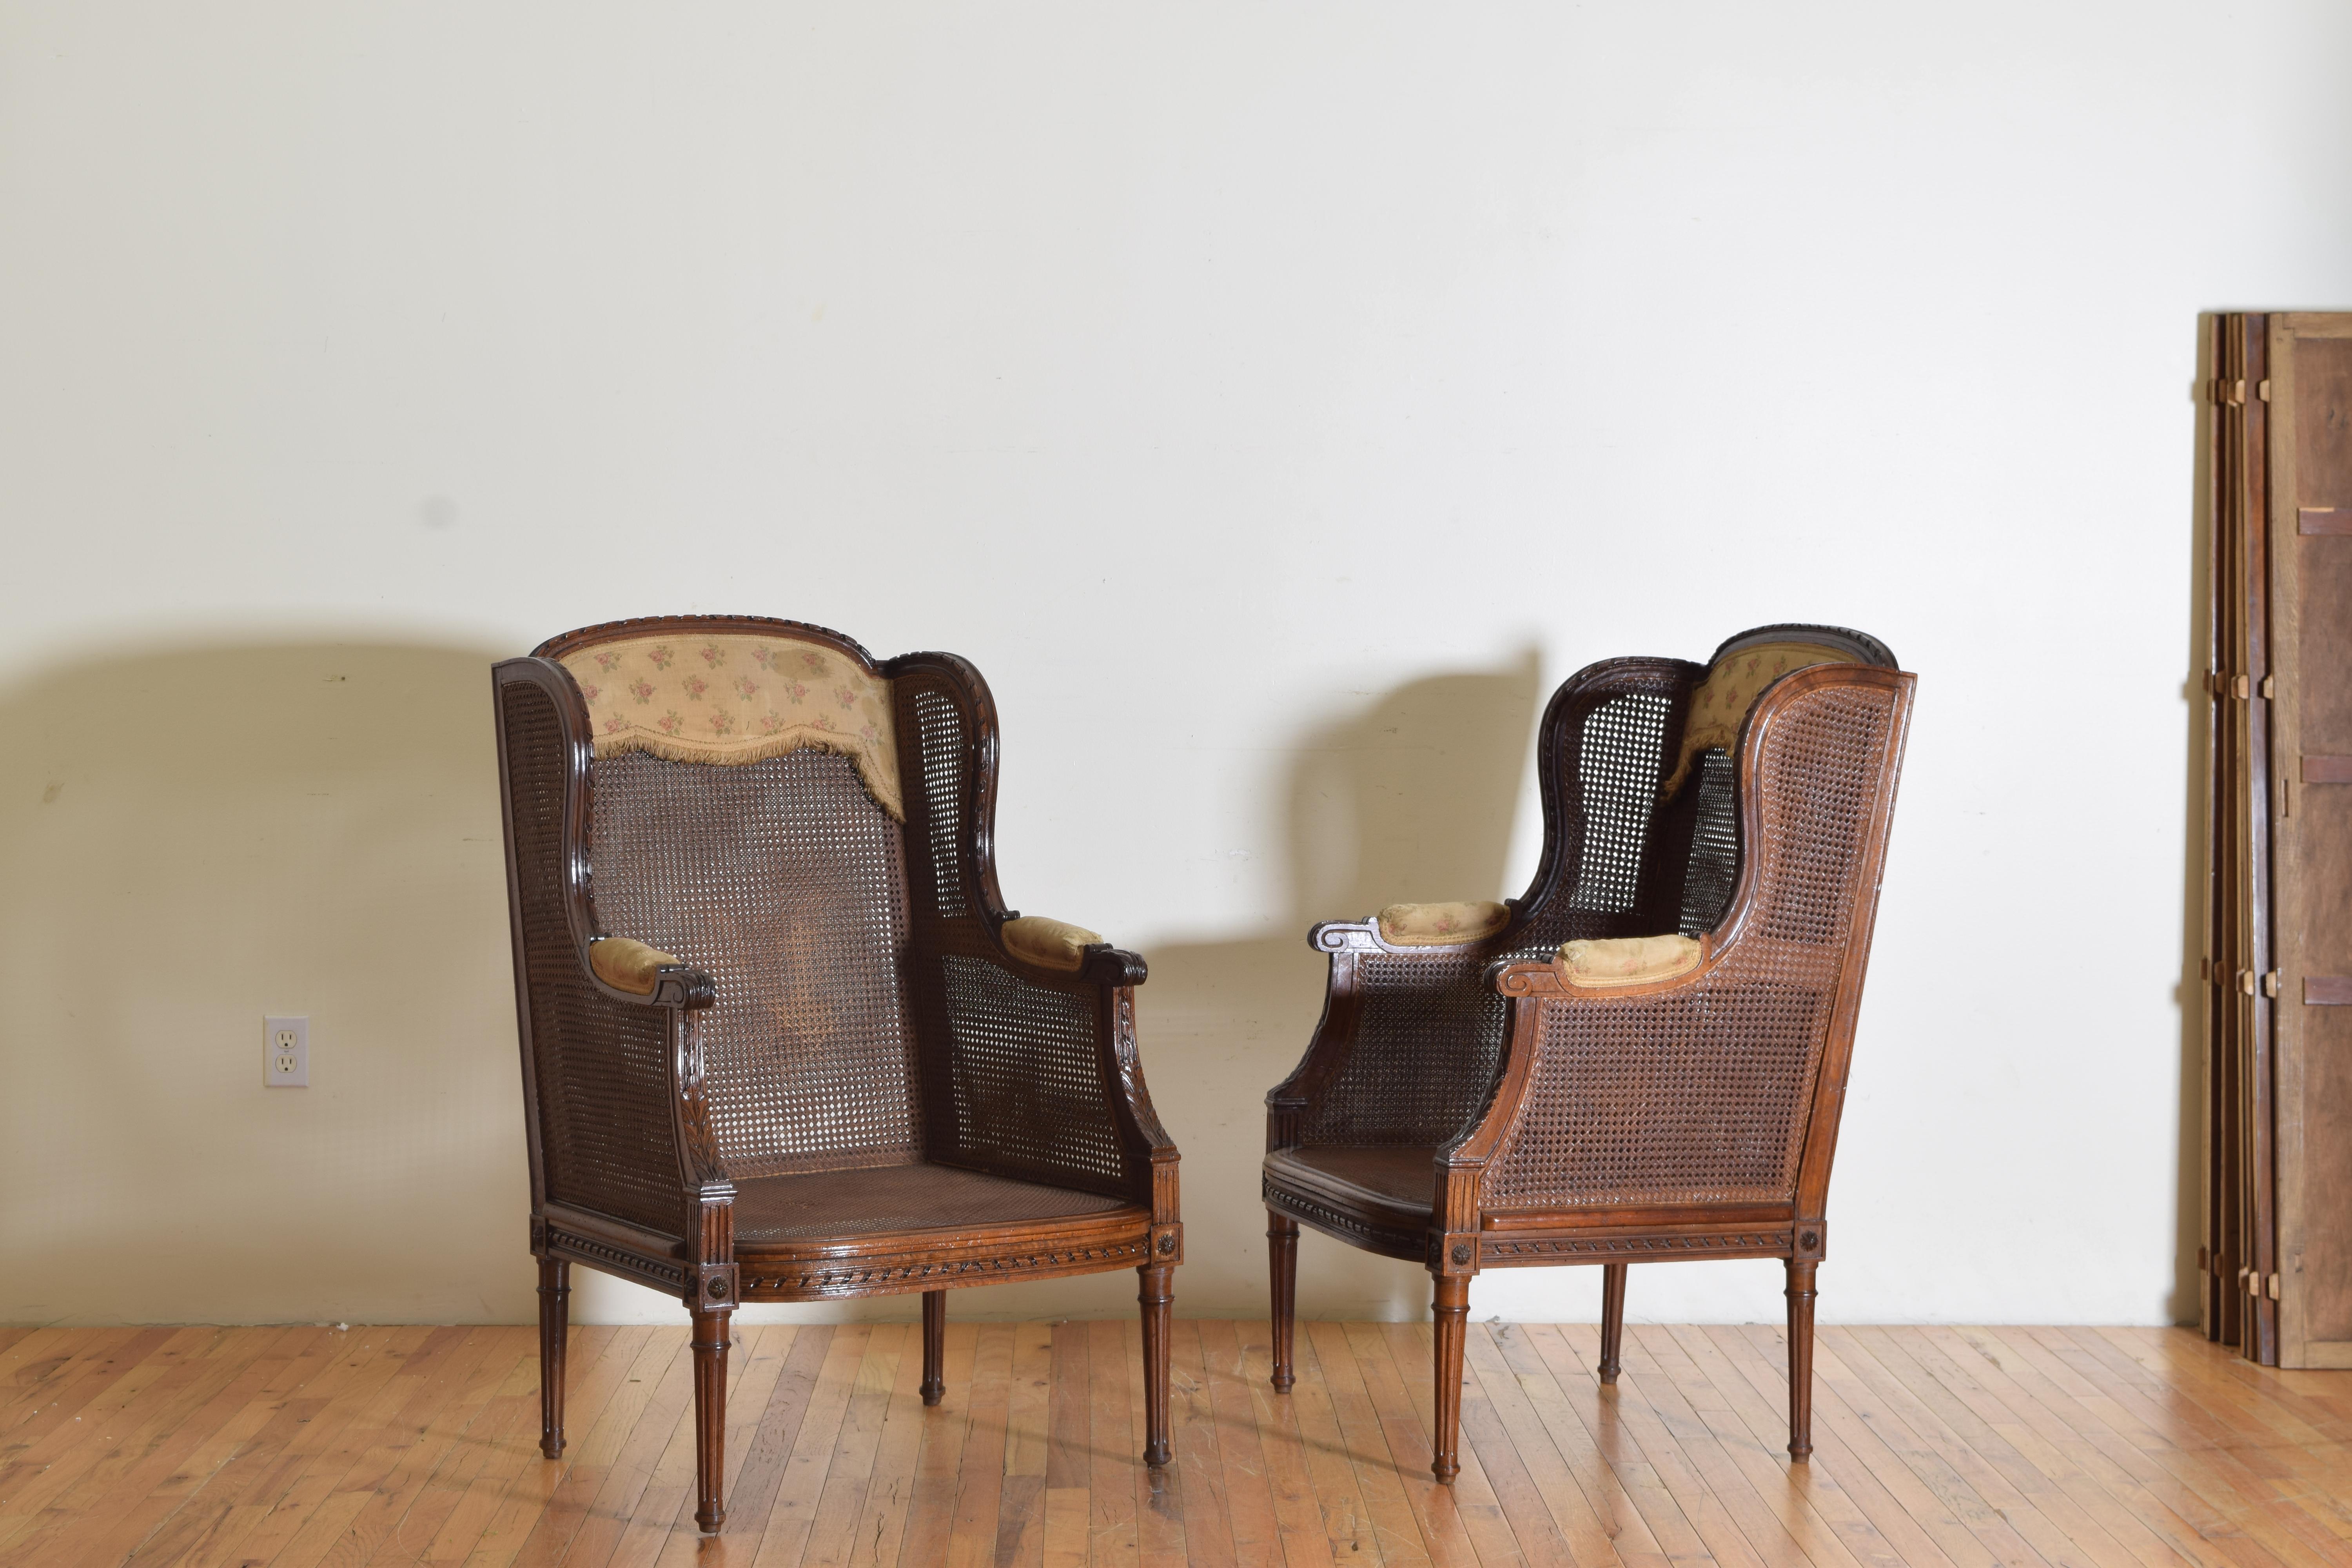 having rounded backrests and winged sides, completely upholstered in caning, with carved arms and carved round tapering legs, the backrests and armrests retaining original upholstery, lacking cushions.